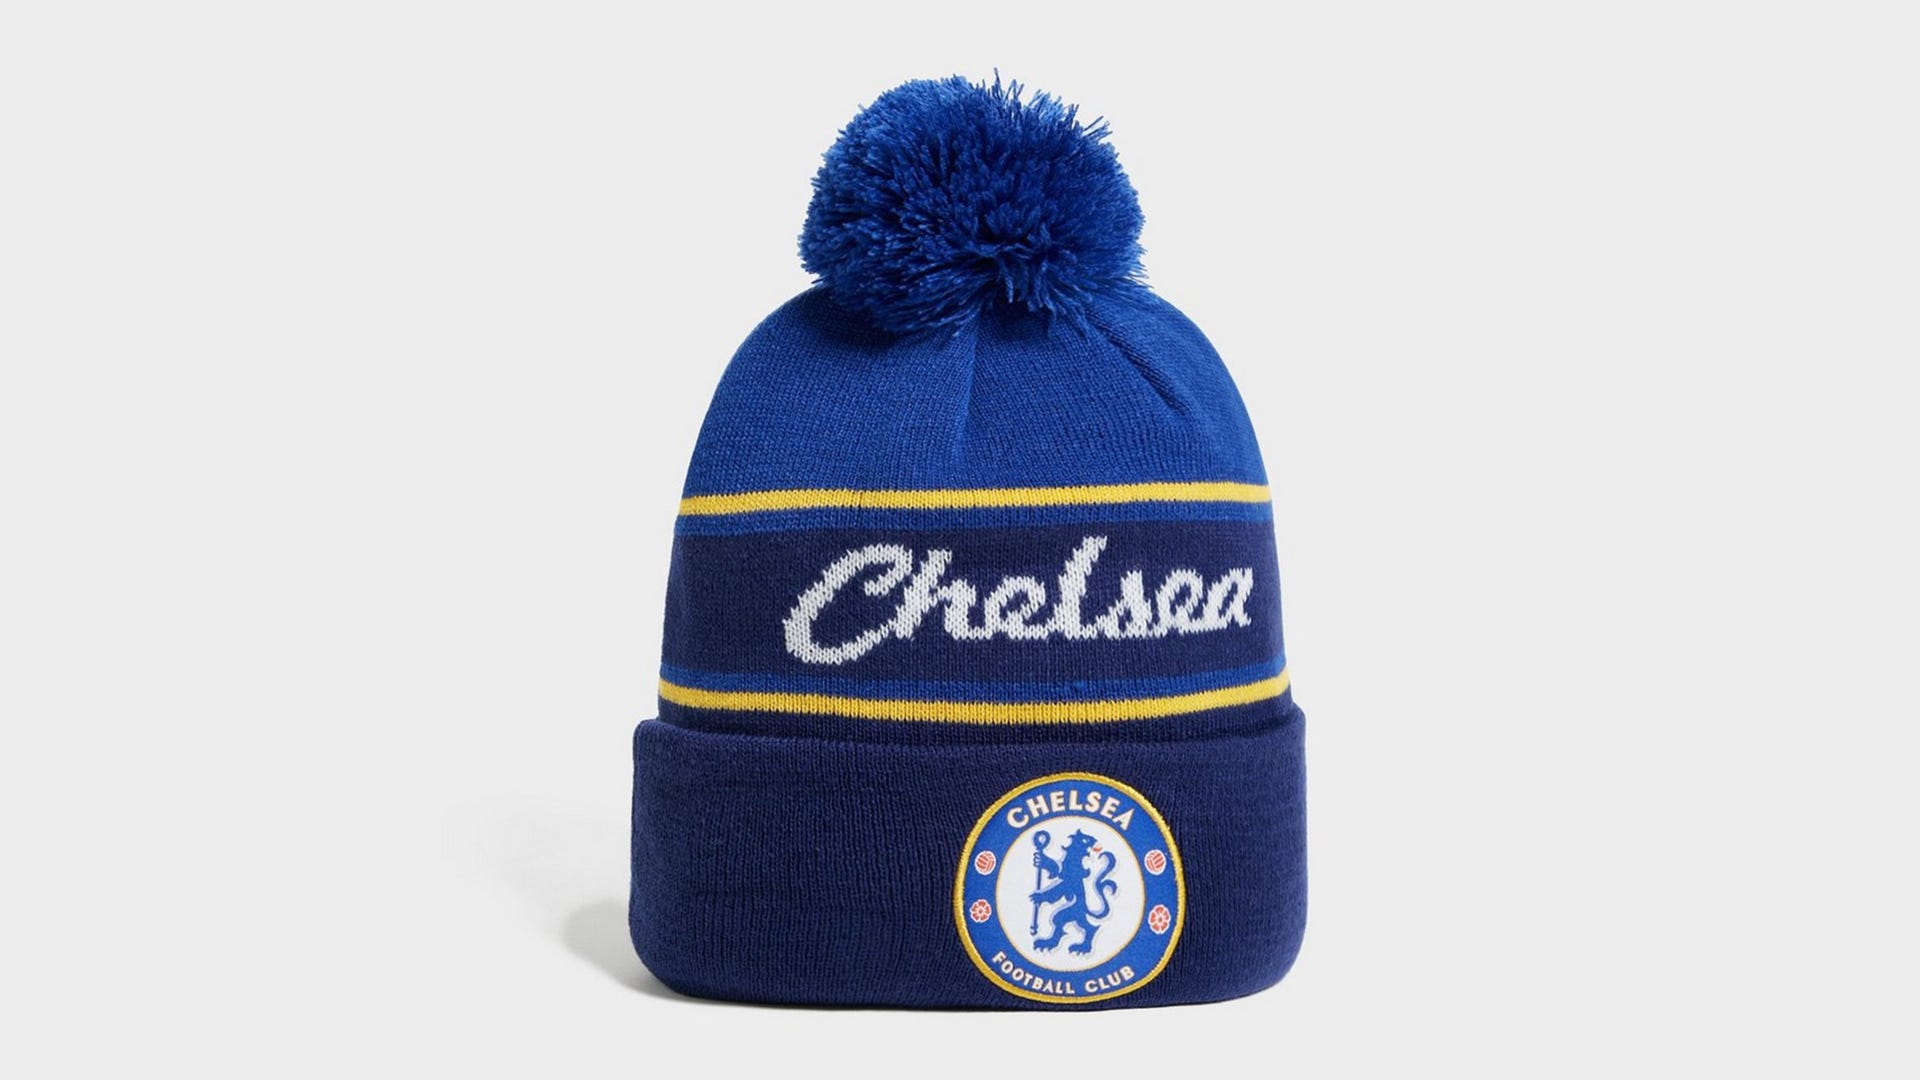 Birthday Gift Idea For Men And Boys Chelsea FC Official Football Gift Ski Hat A Great Christmas